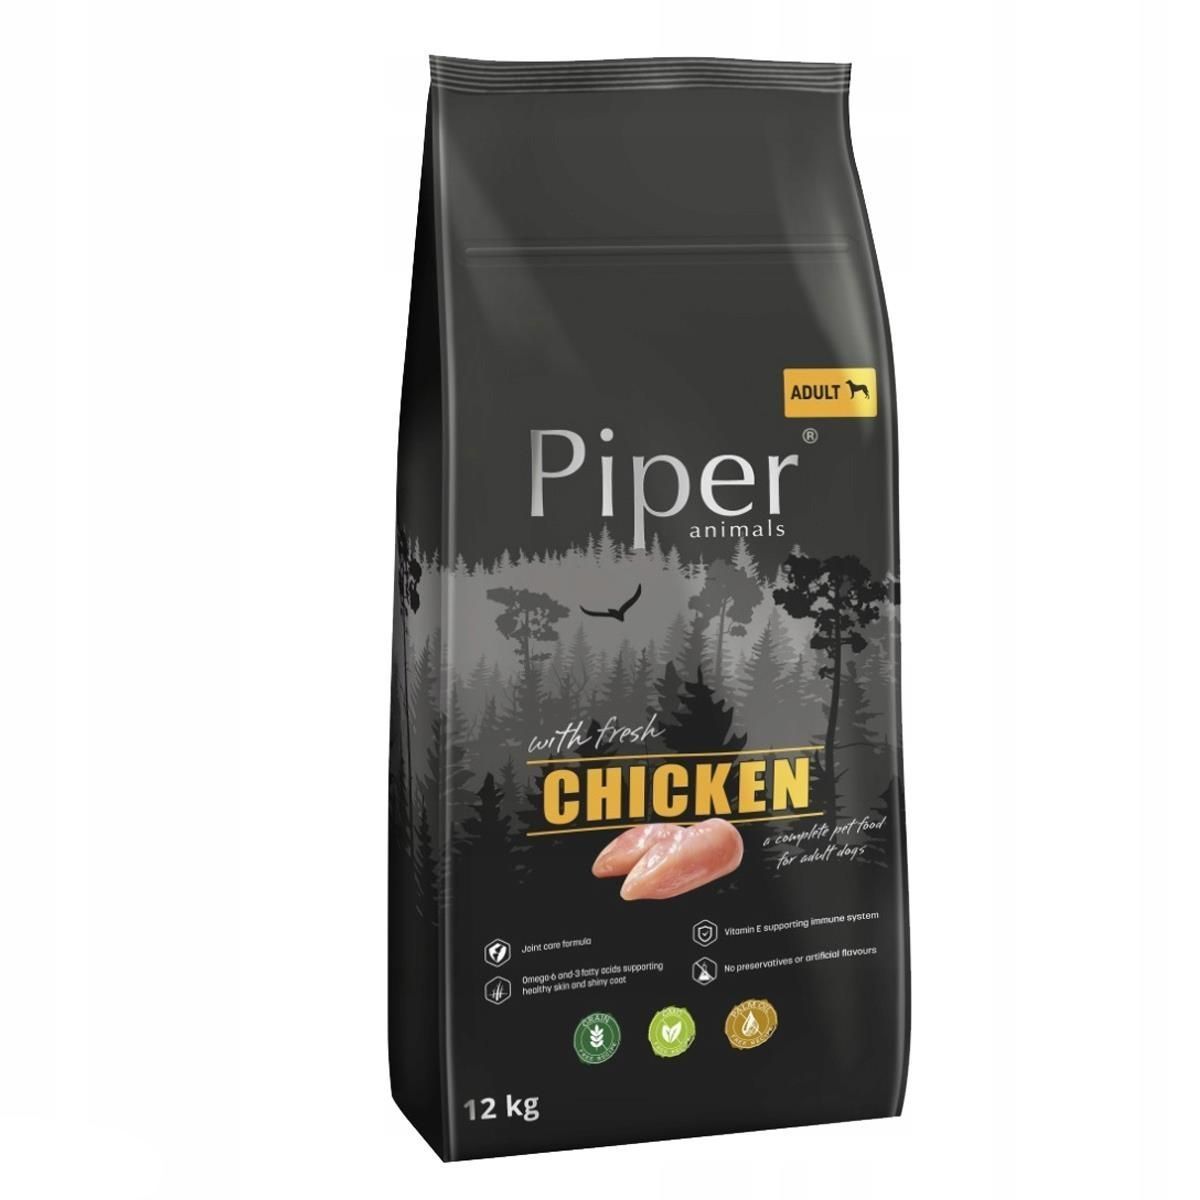 Piper Adult Dog, Pui, 12 Kg